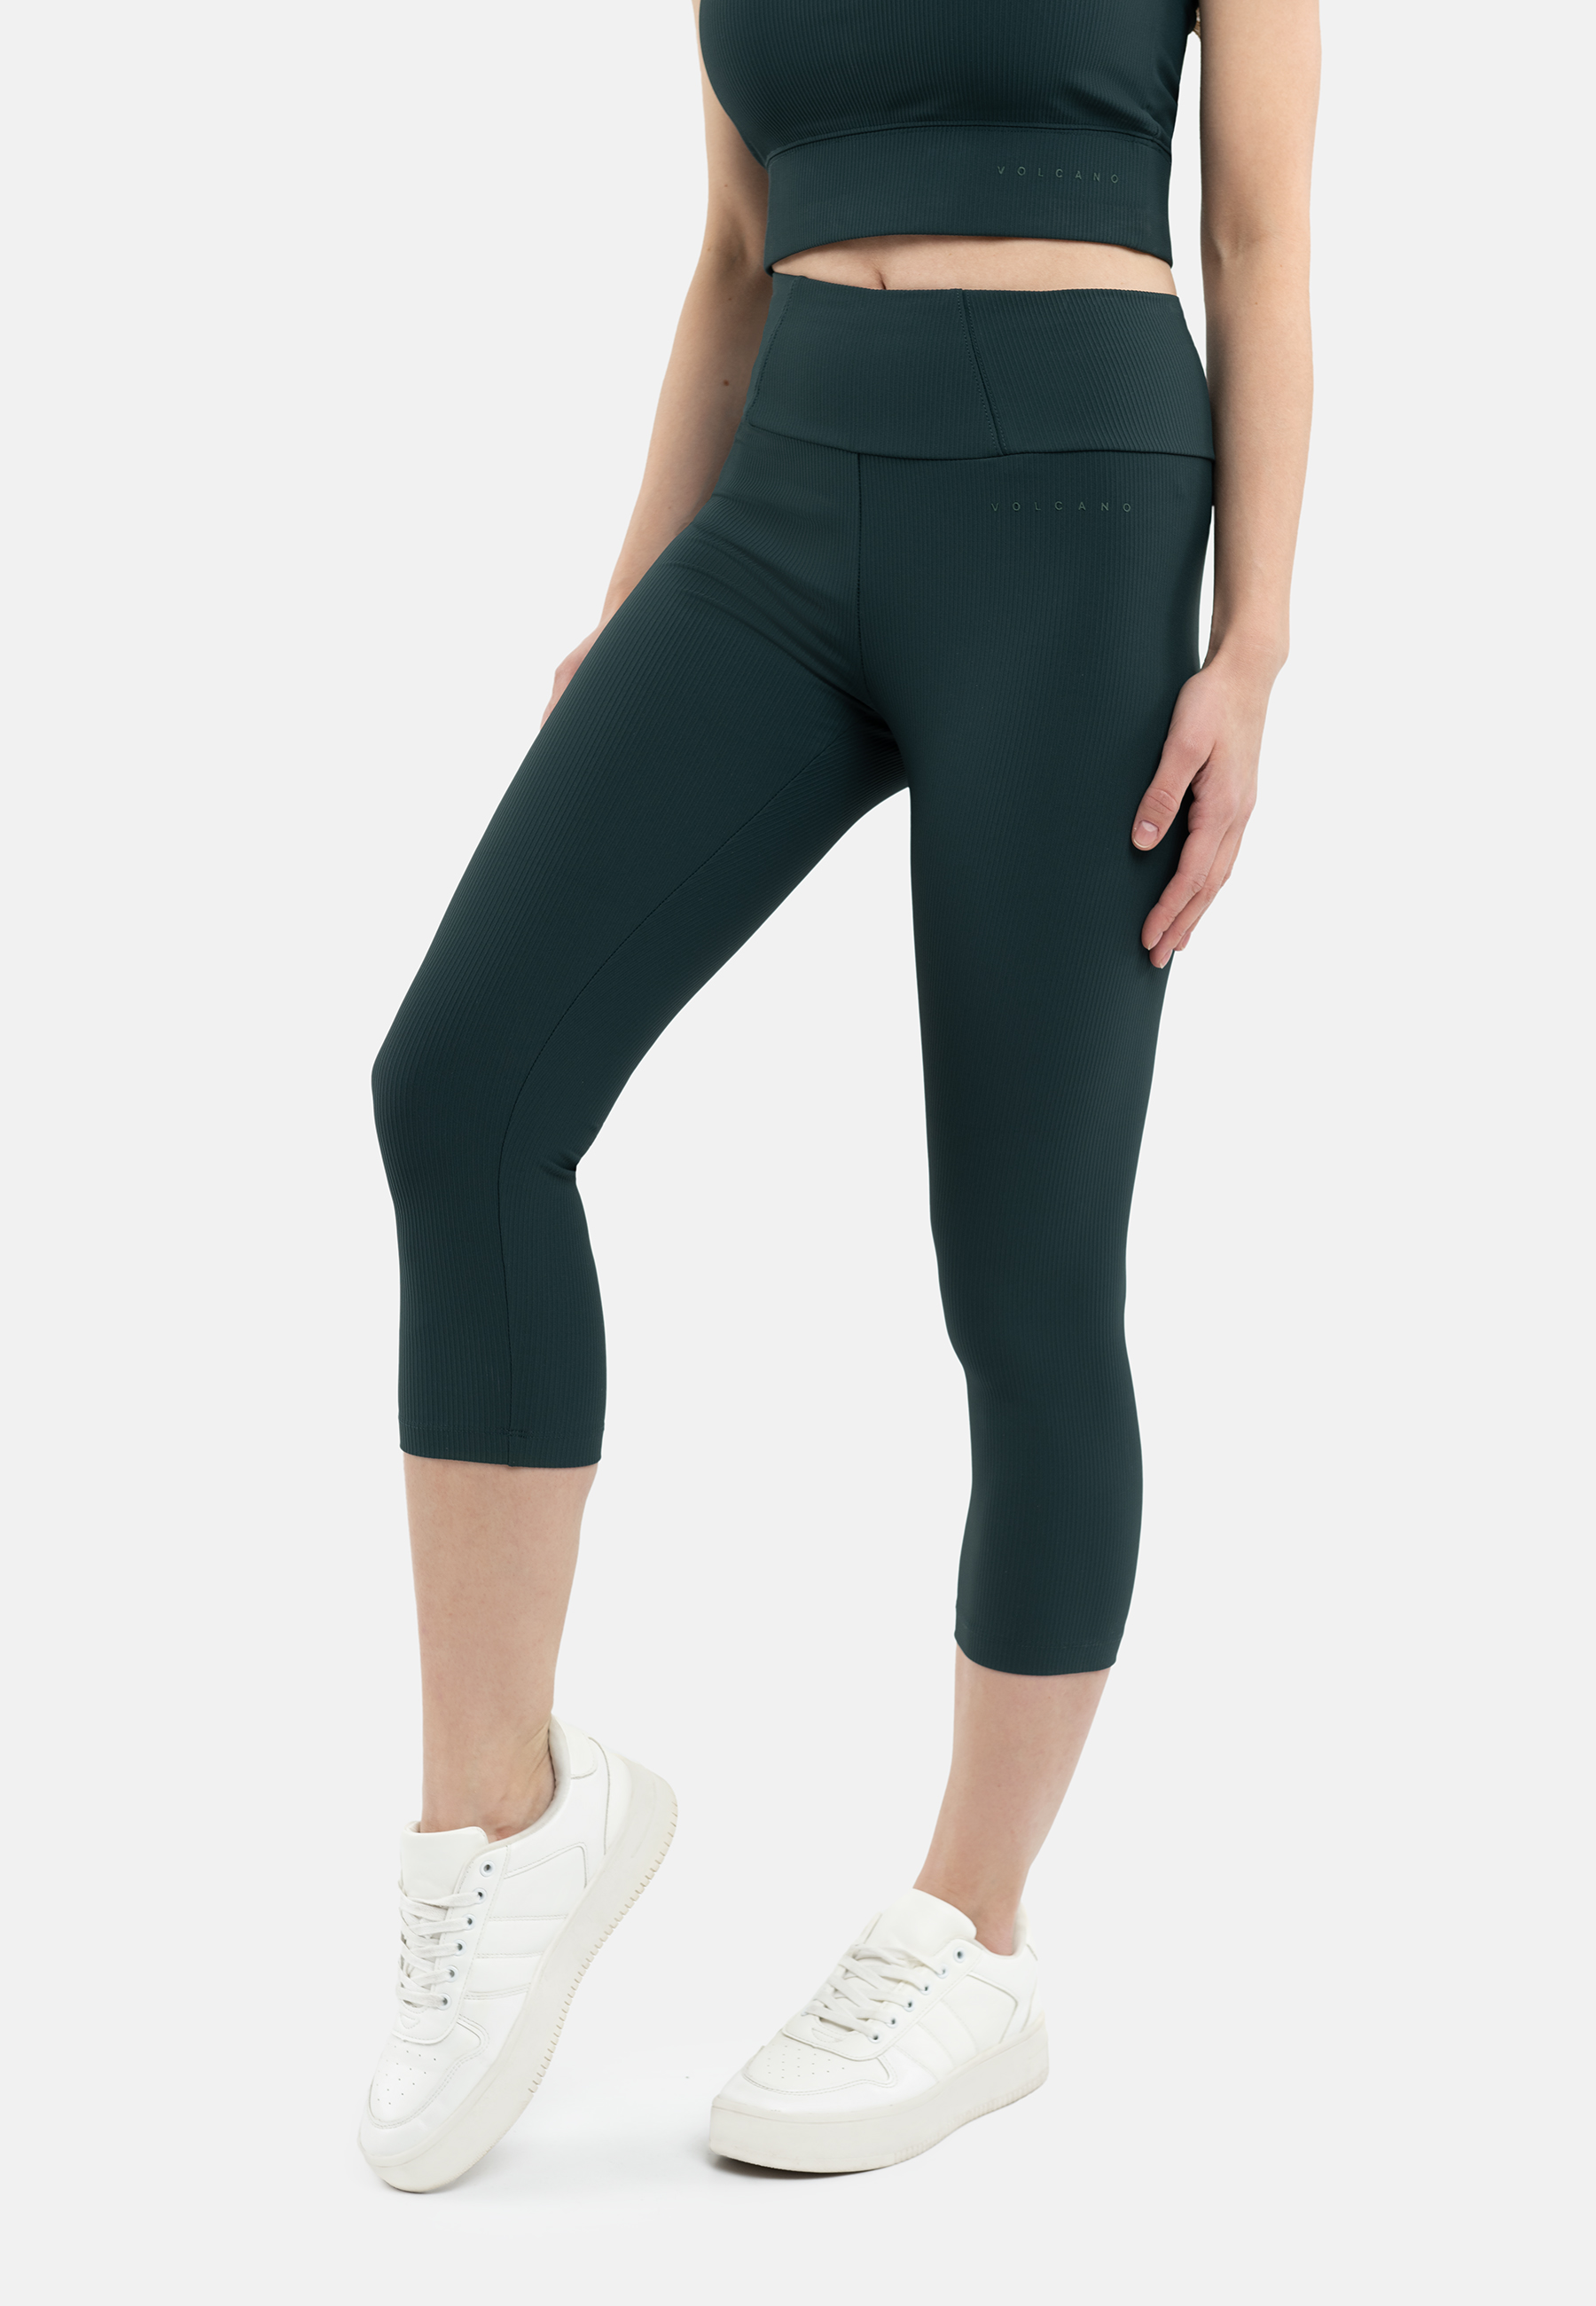 Volcano Woman's Gym Trousers N-Palermo